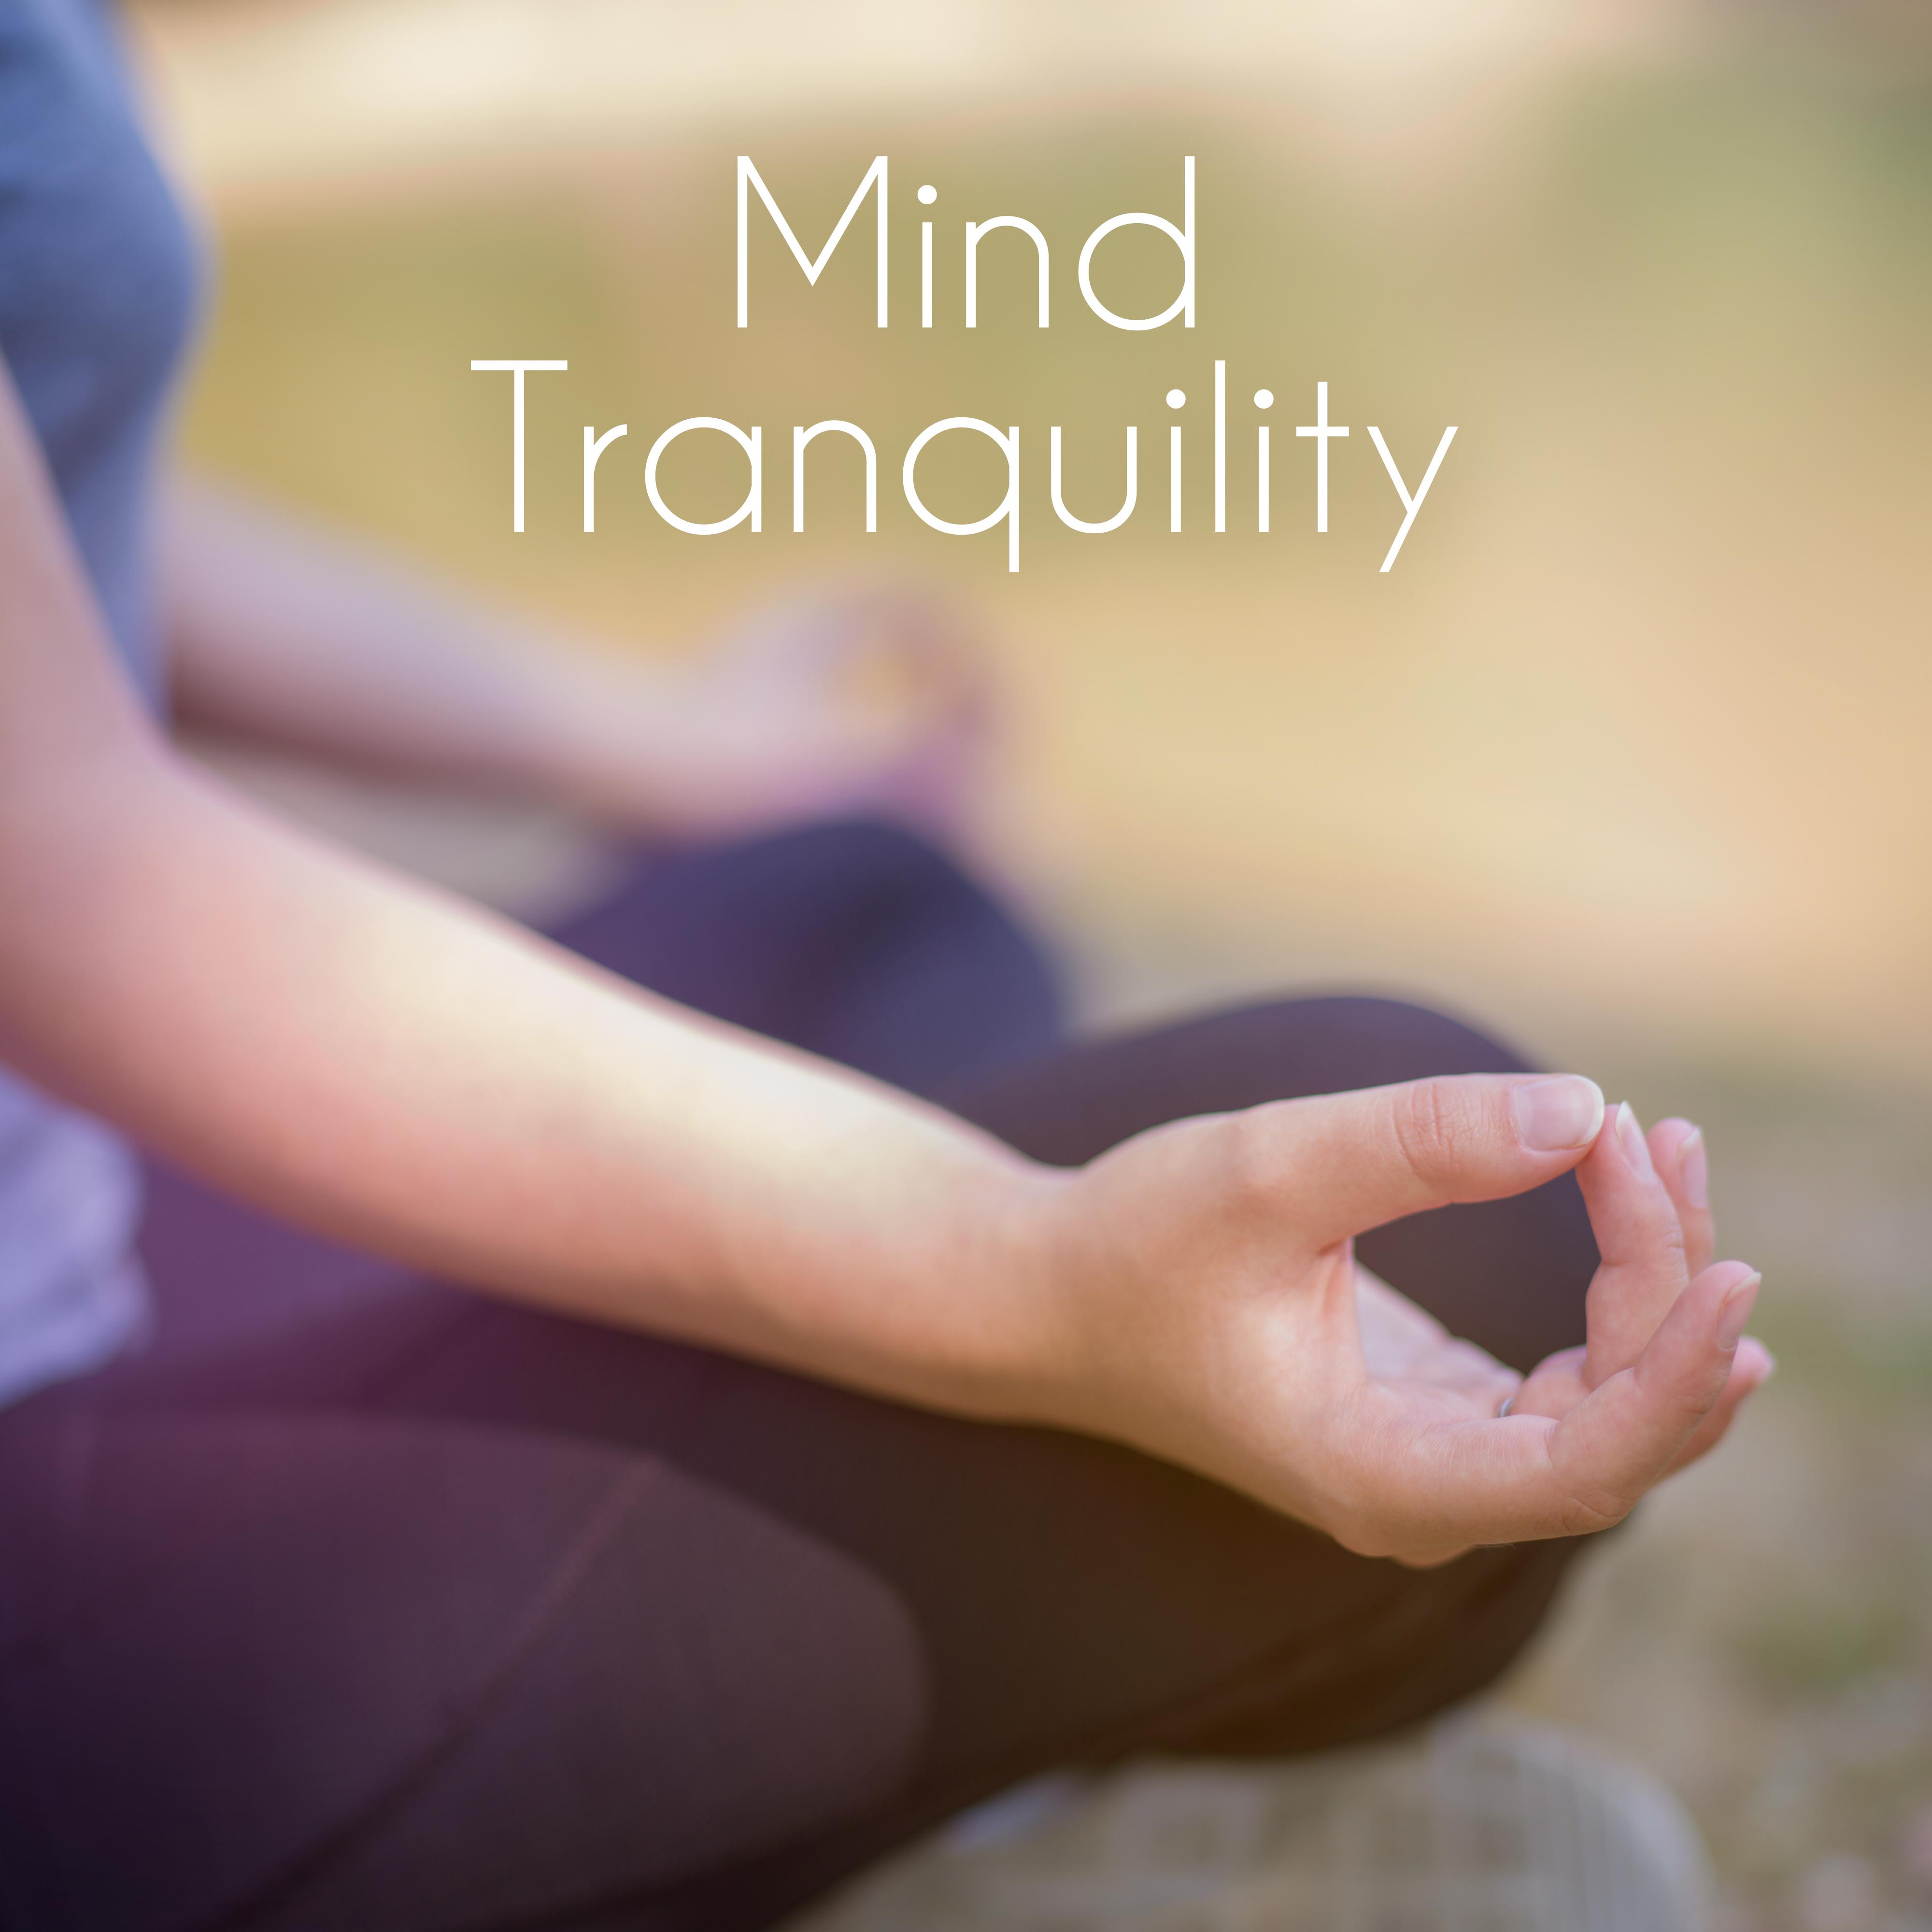 Mind Tranquility: Inner Self Control, Peace and Harmony through Meditation and Yoga Practice